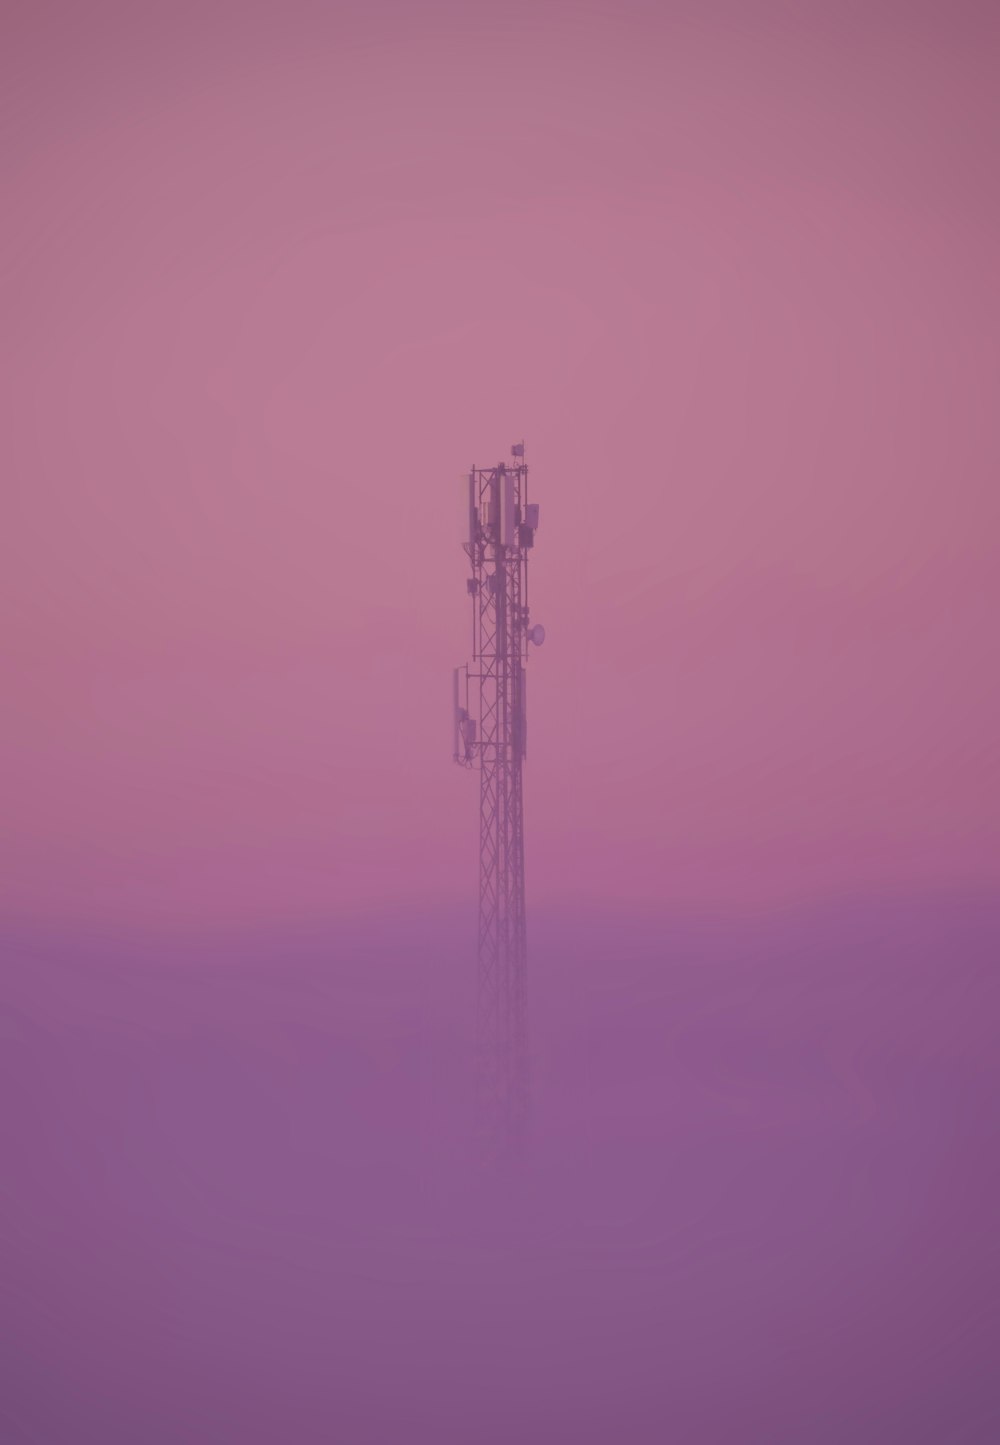 a tall tower in the middle of a foggy field